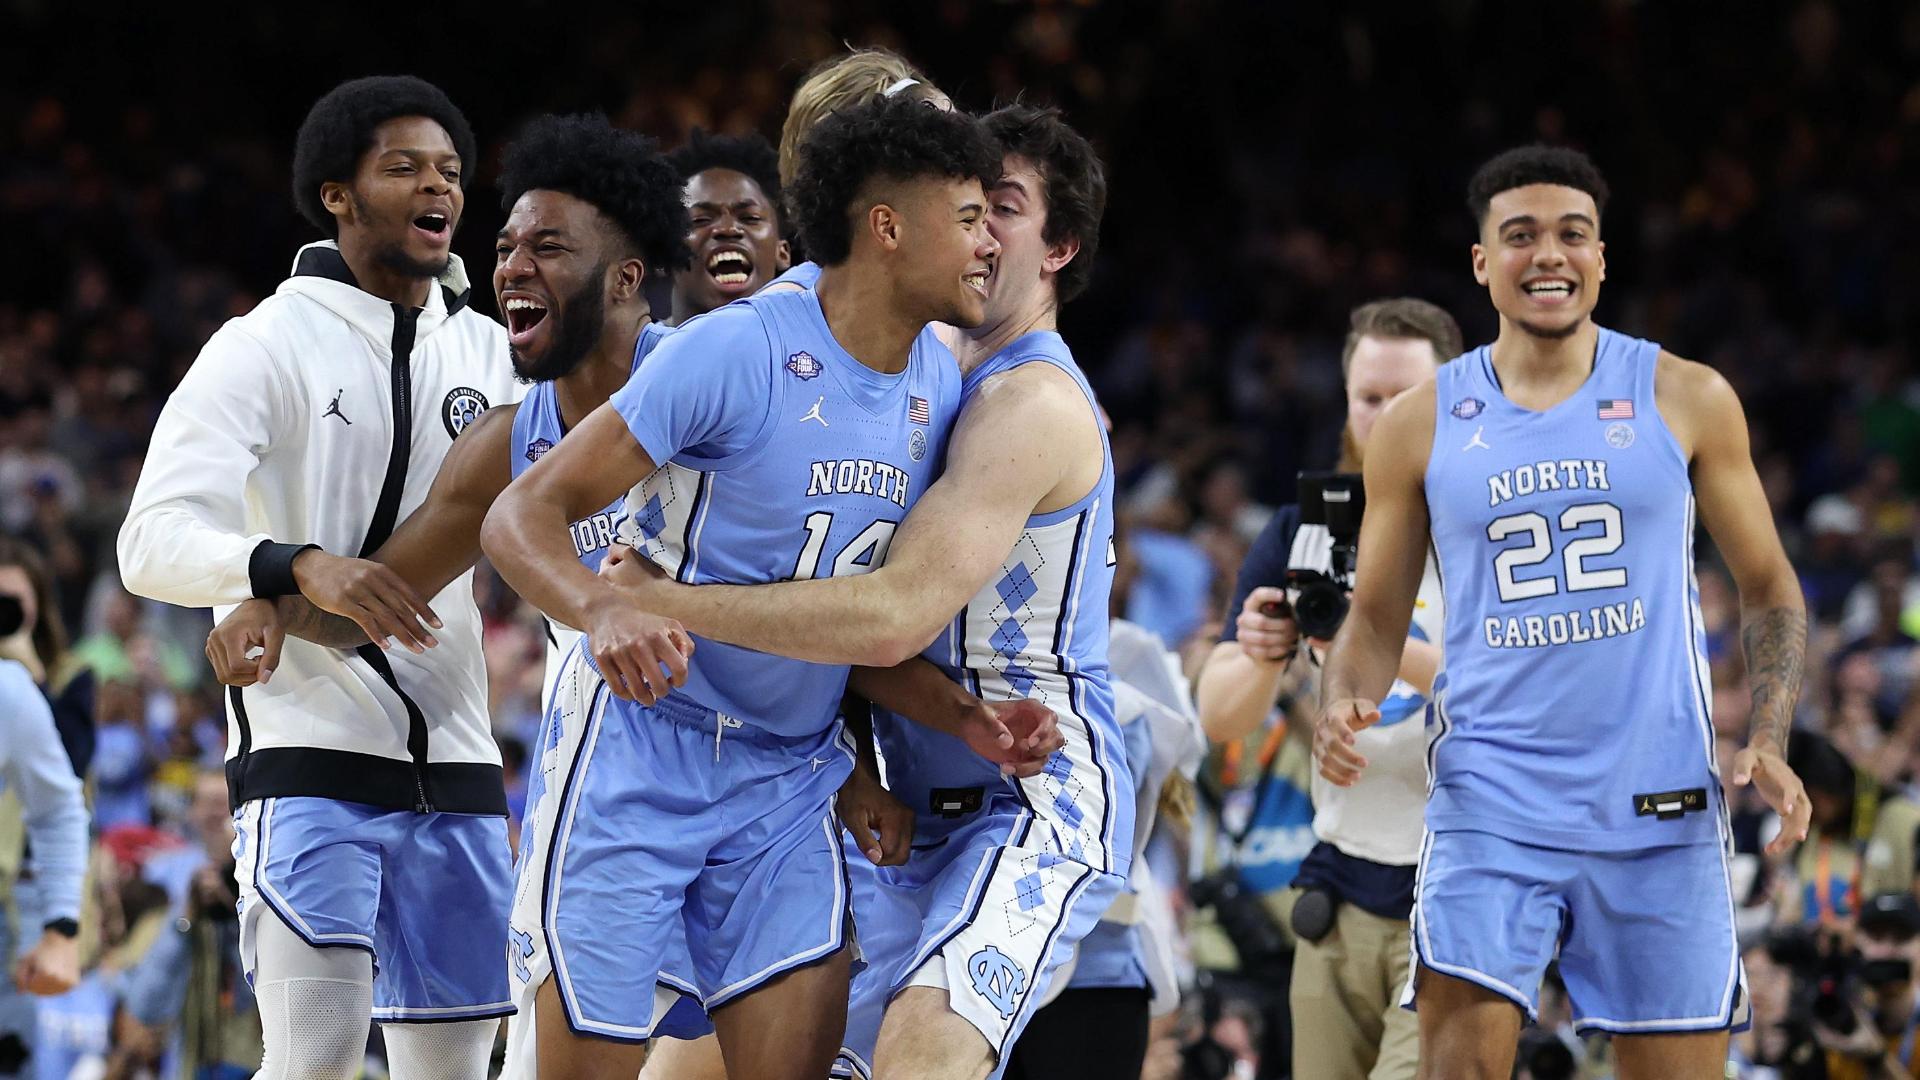 UNC tops Duke in epic back-and-forth finish, ending Coach K's career